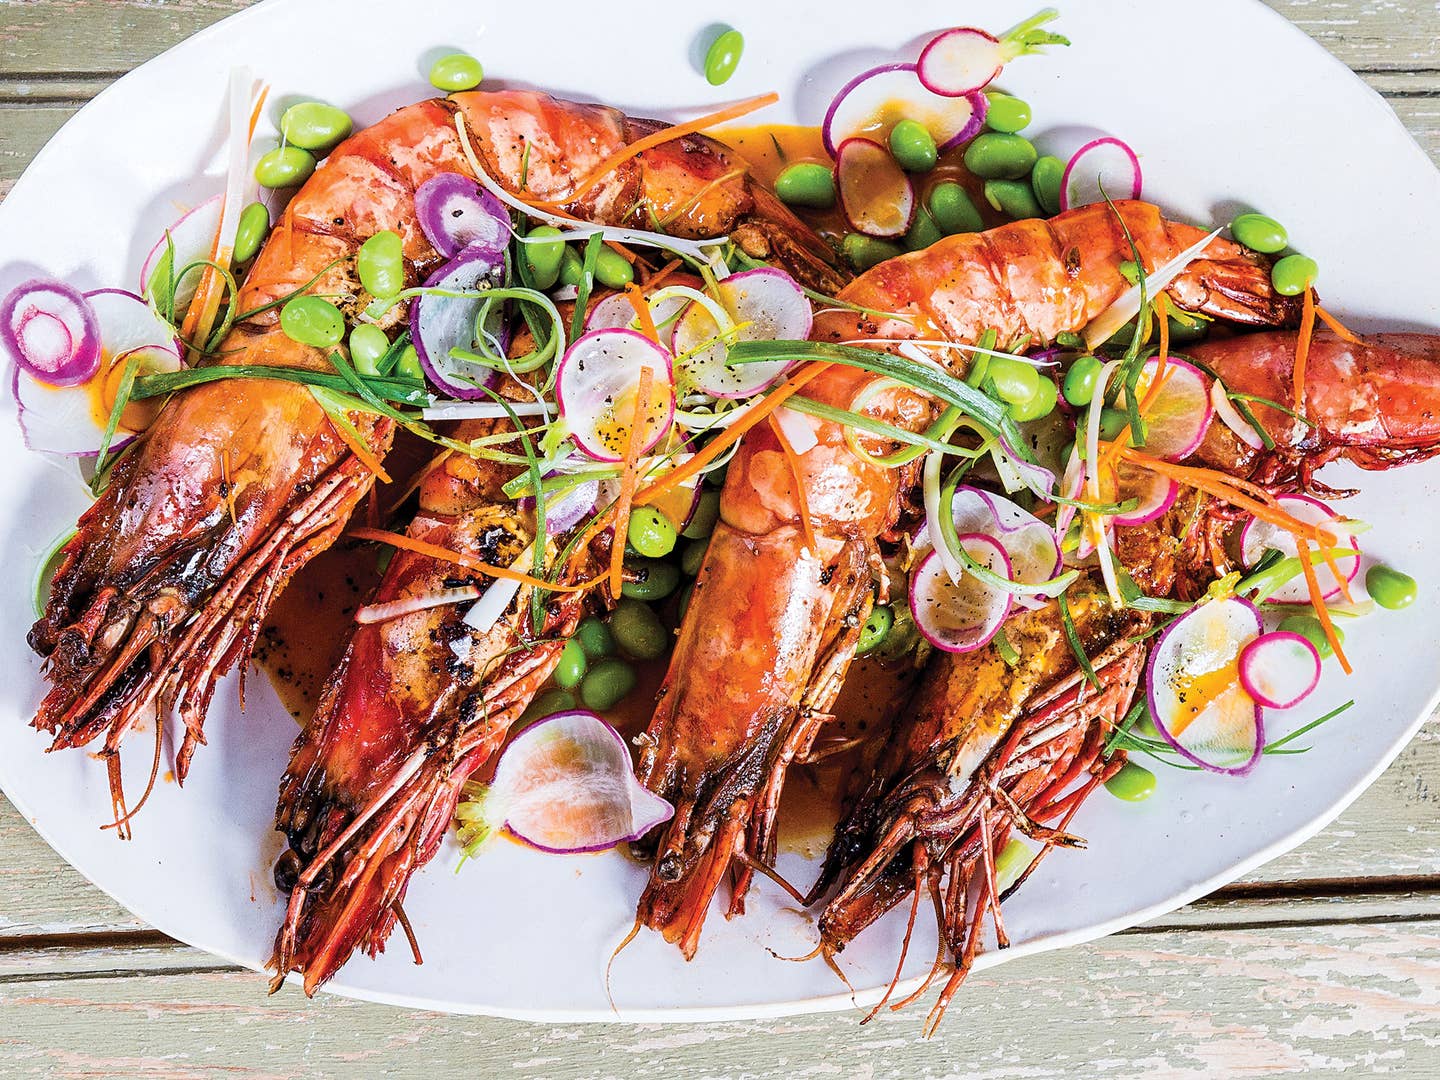 Prawns with Edamame Slaw and Carrot-Miso Sauce